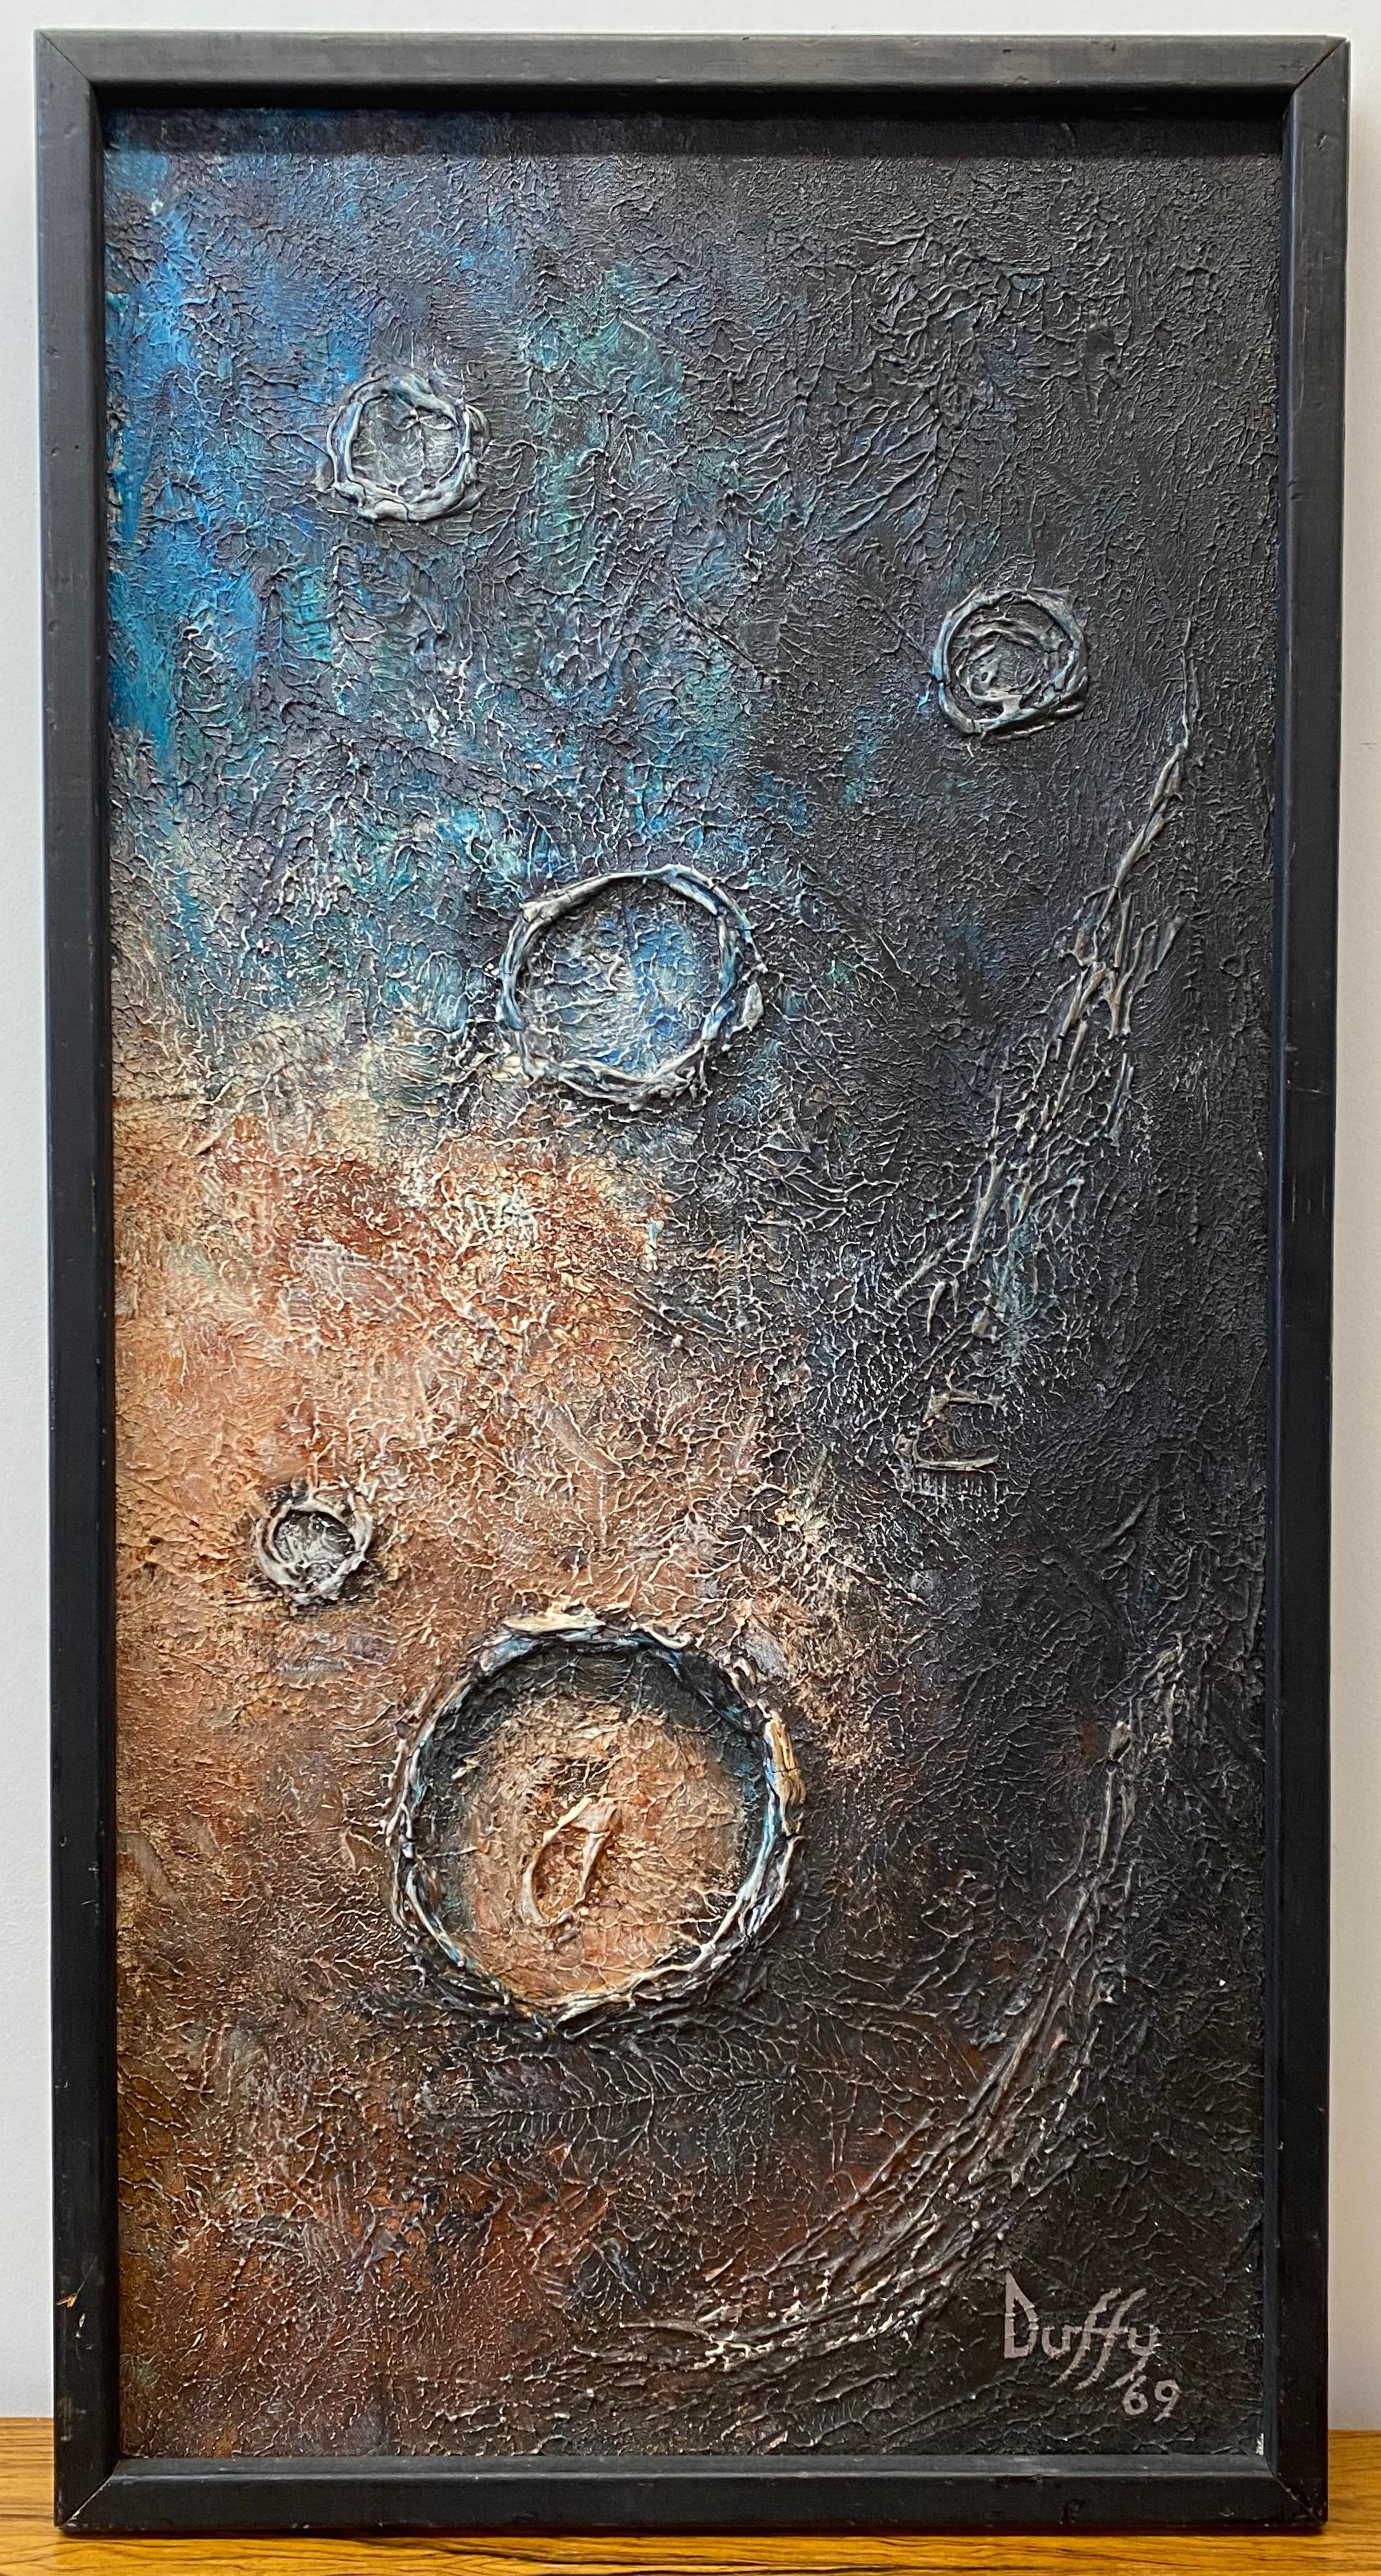 Unknown Landscape Painting - Mid Century Modern "Craters of the Moon" Original Oil Painting by Duffy c.1969